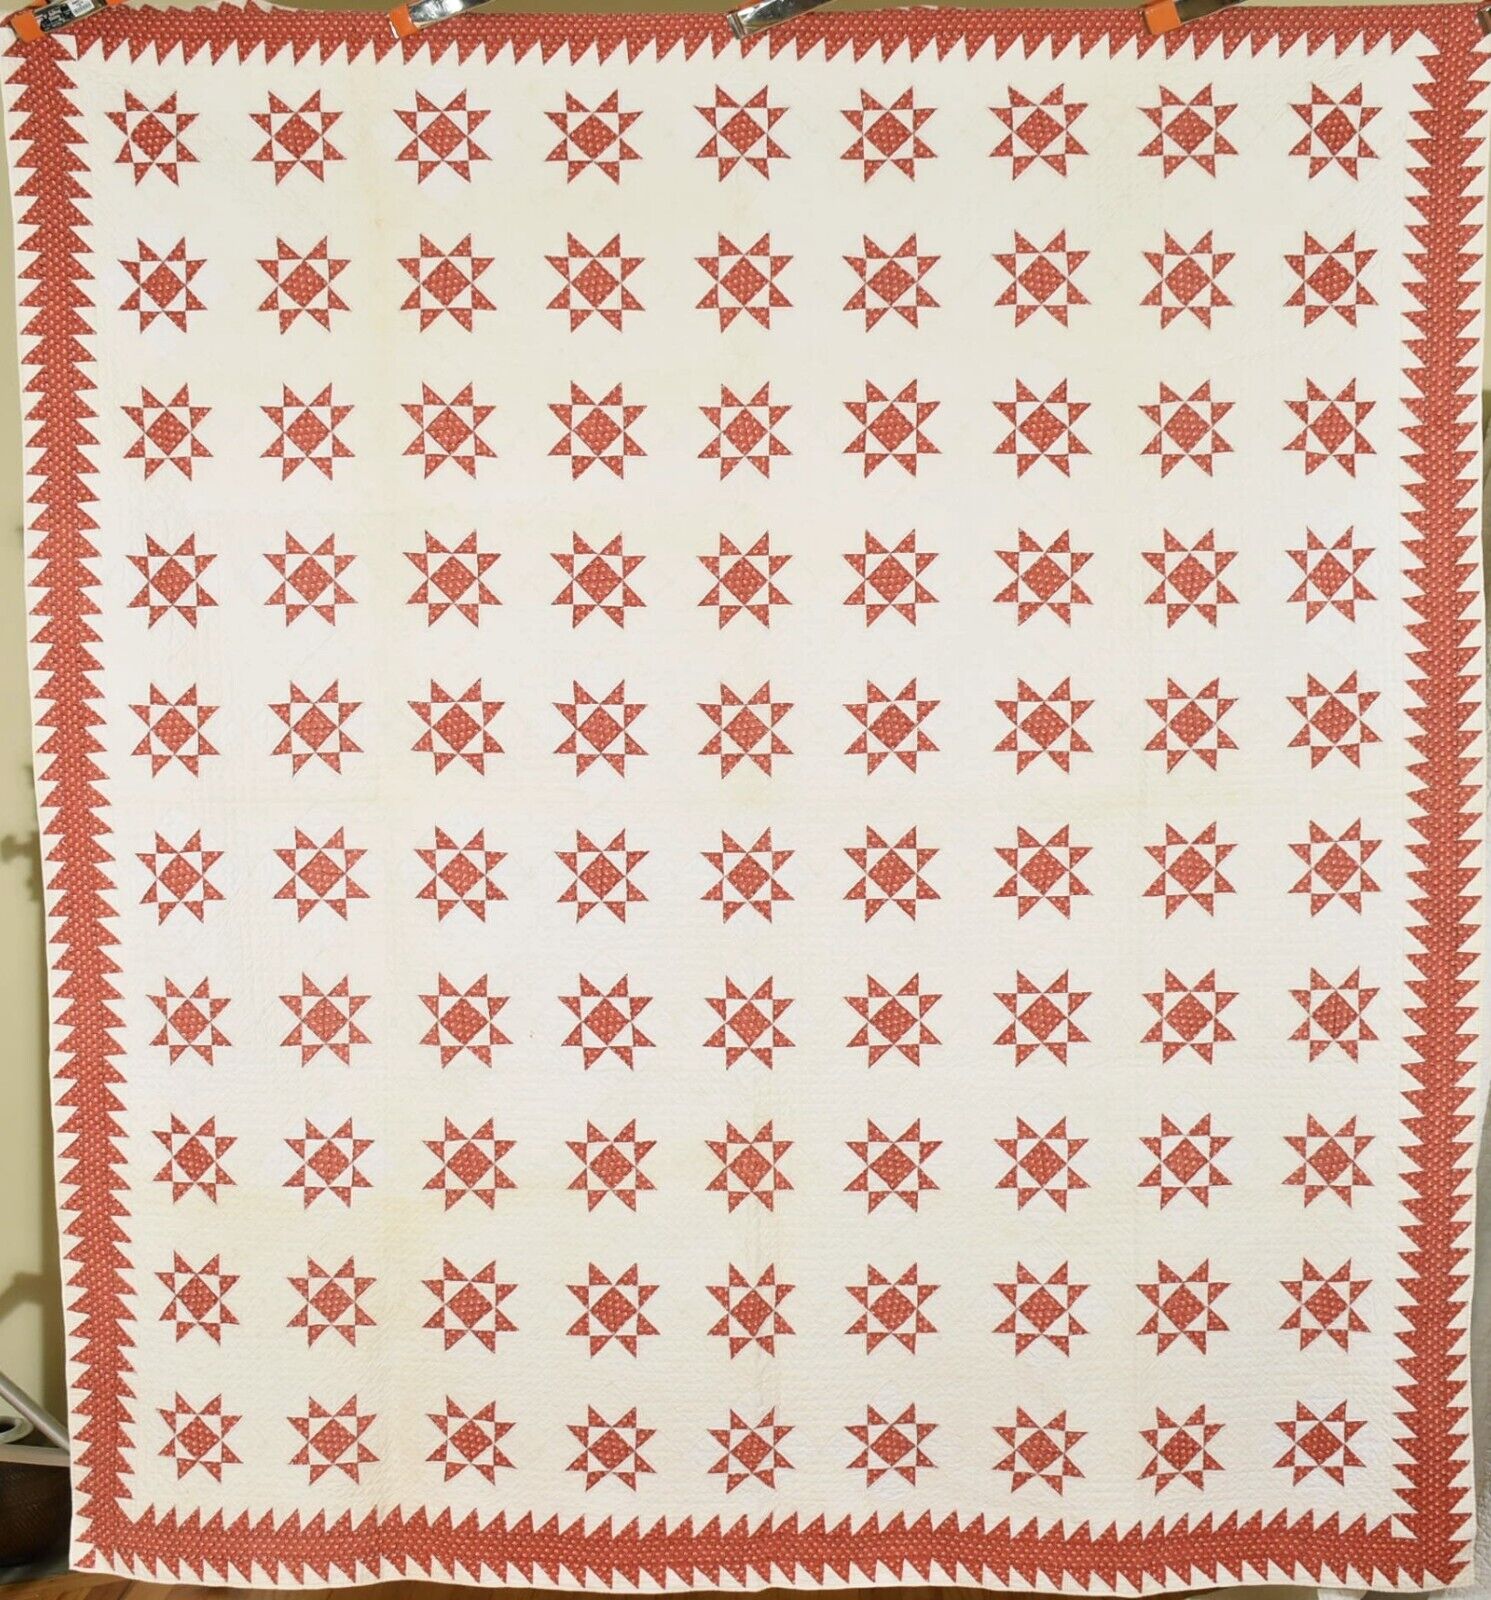 WELL QUILTED Vintage 1840's Red & White Stars Antique Quilt ~Sawtooth Border